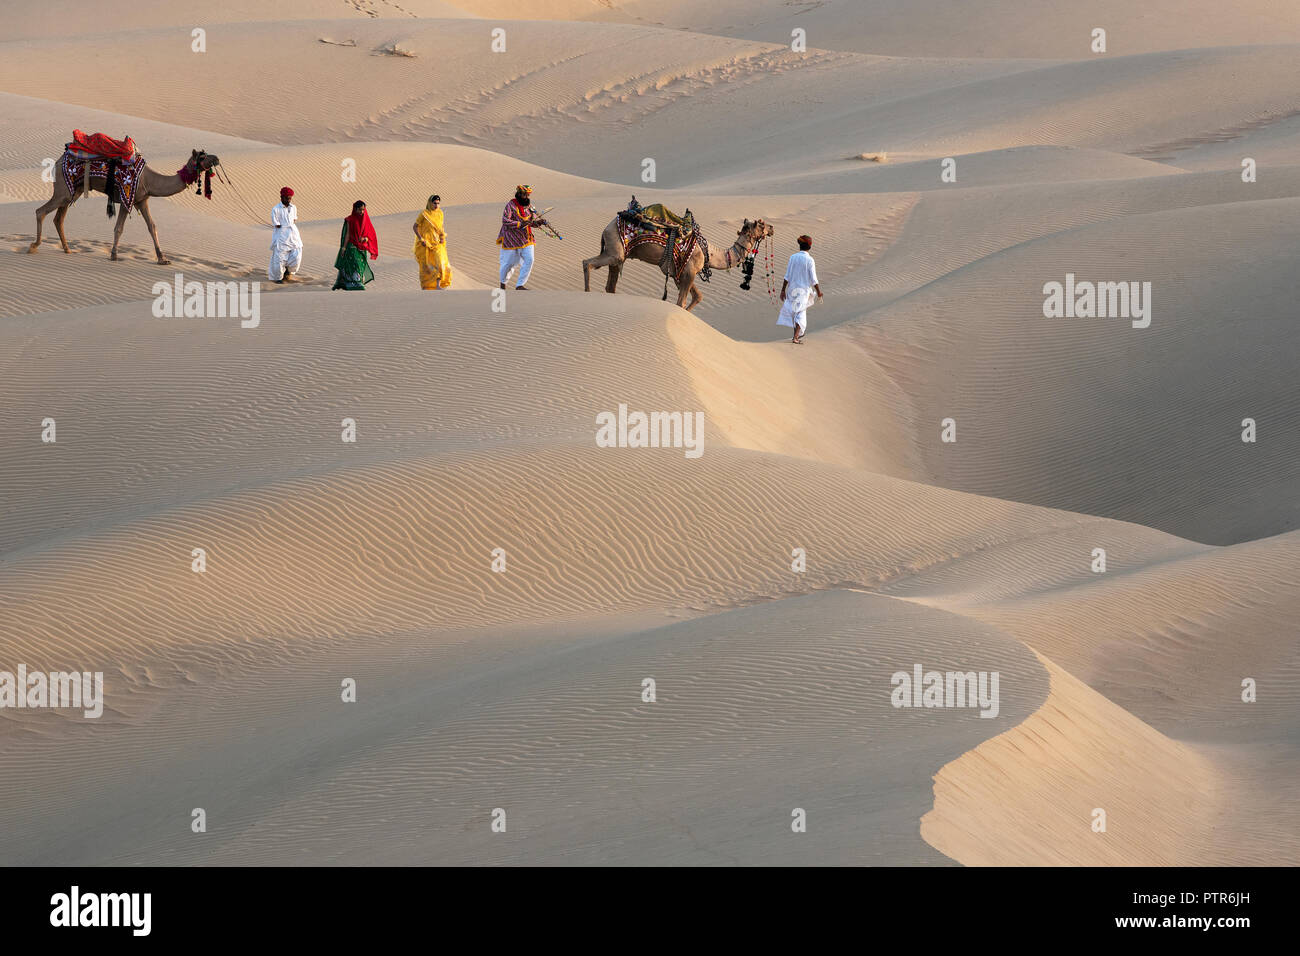 The image of Rajasthani trditional man and woman in sand dunes,  Jaisalmer, Rajasthan, India Stock Photo